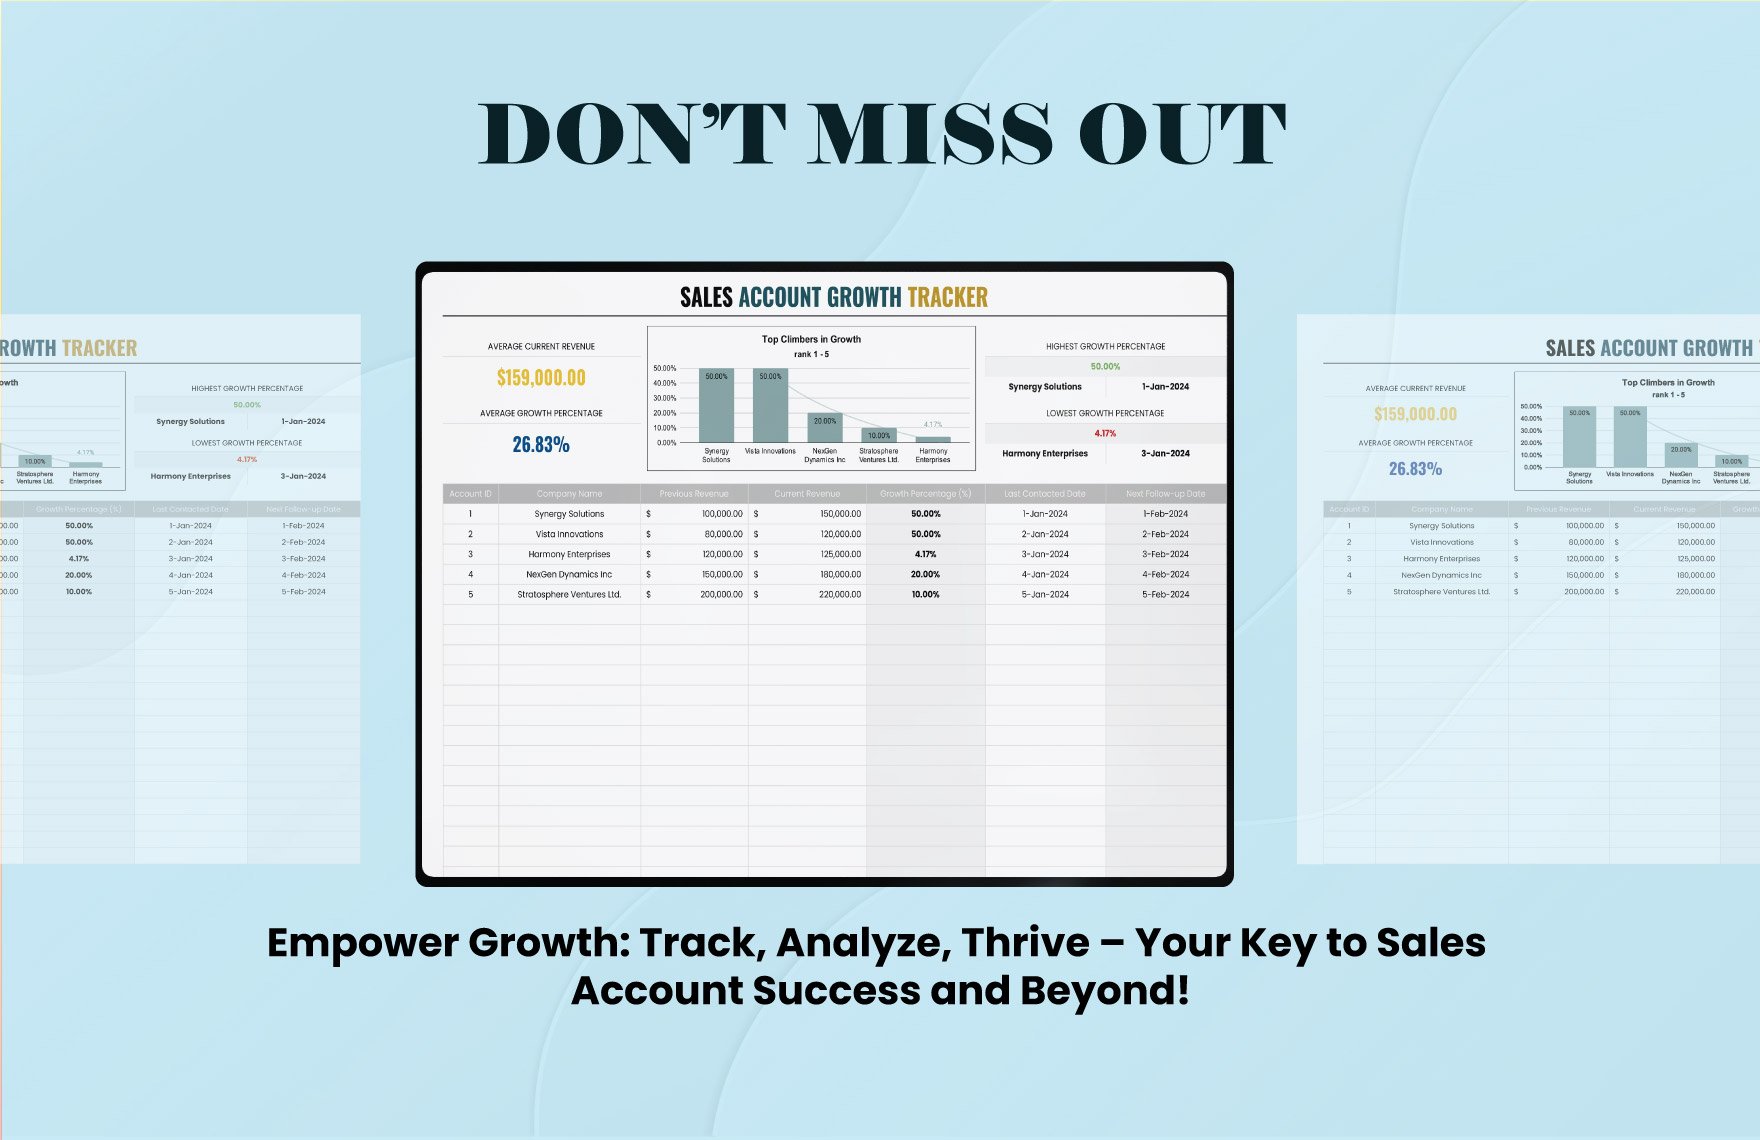 Sales Account Growth Tracker Template